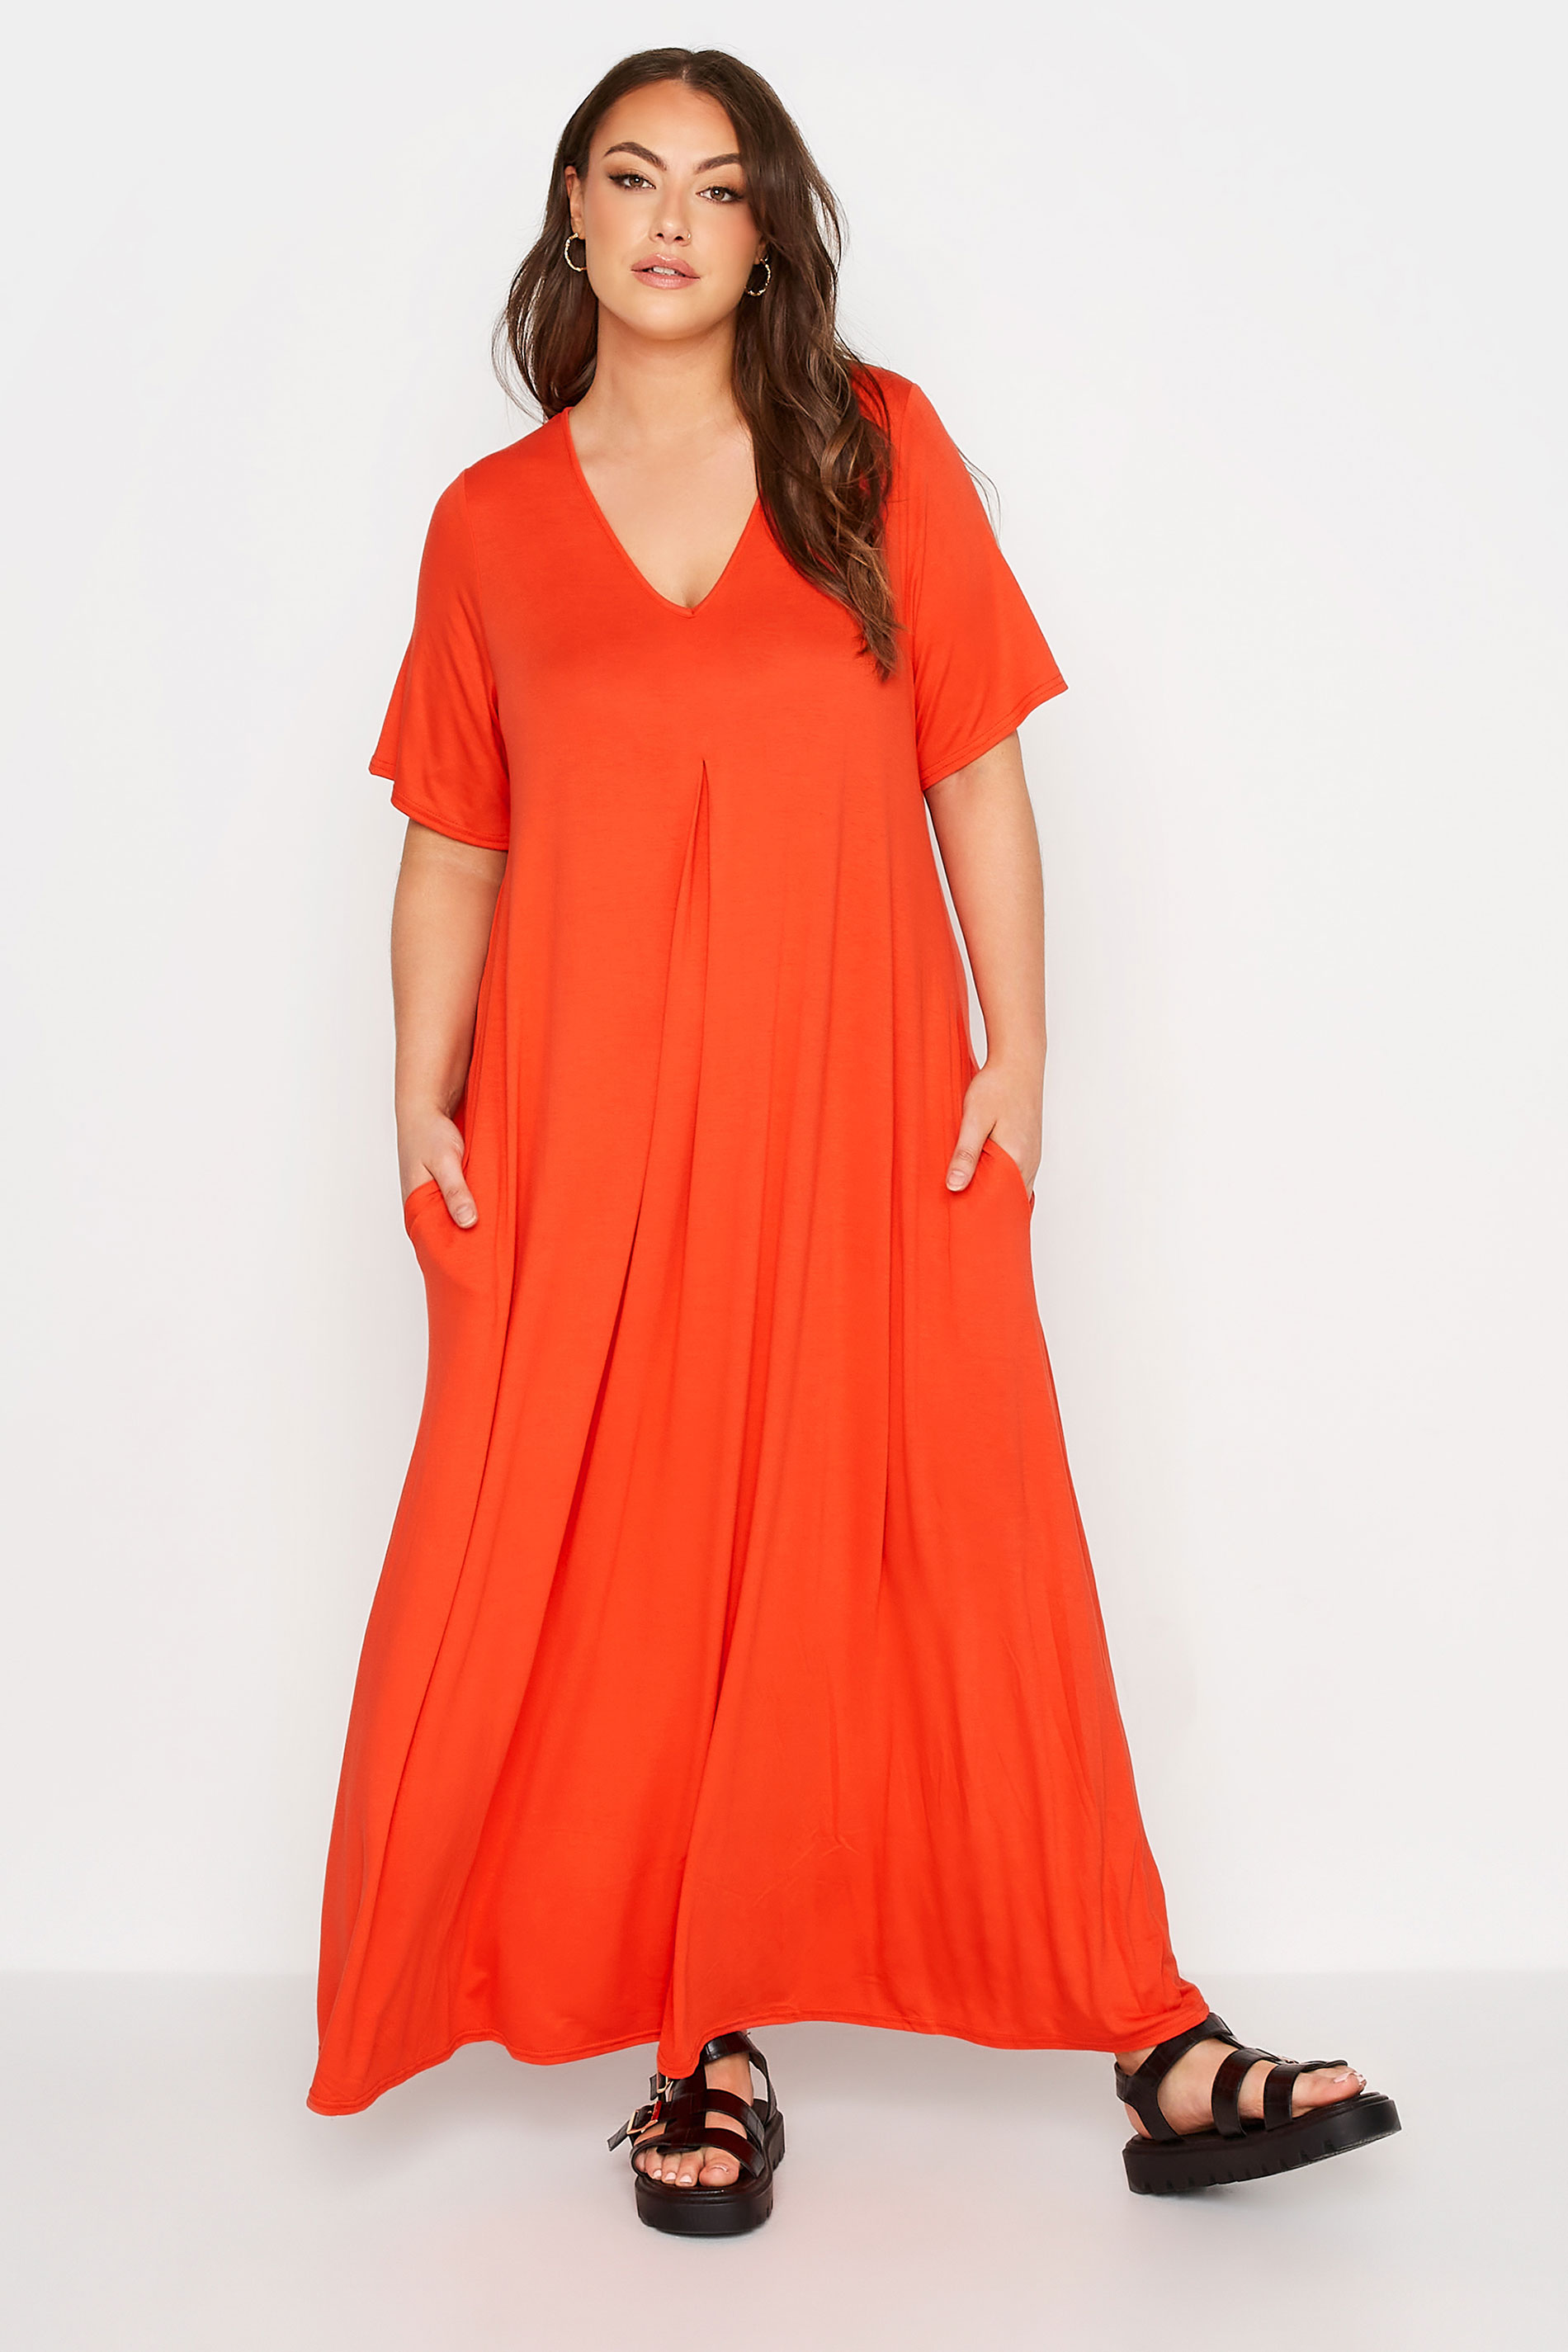 LIMITED COLLECTION Curve Orange Pleat Front Maxi Dress_A.jpg